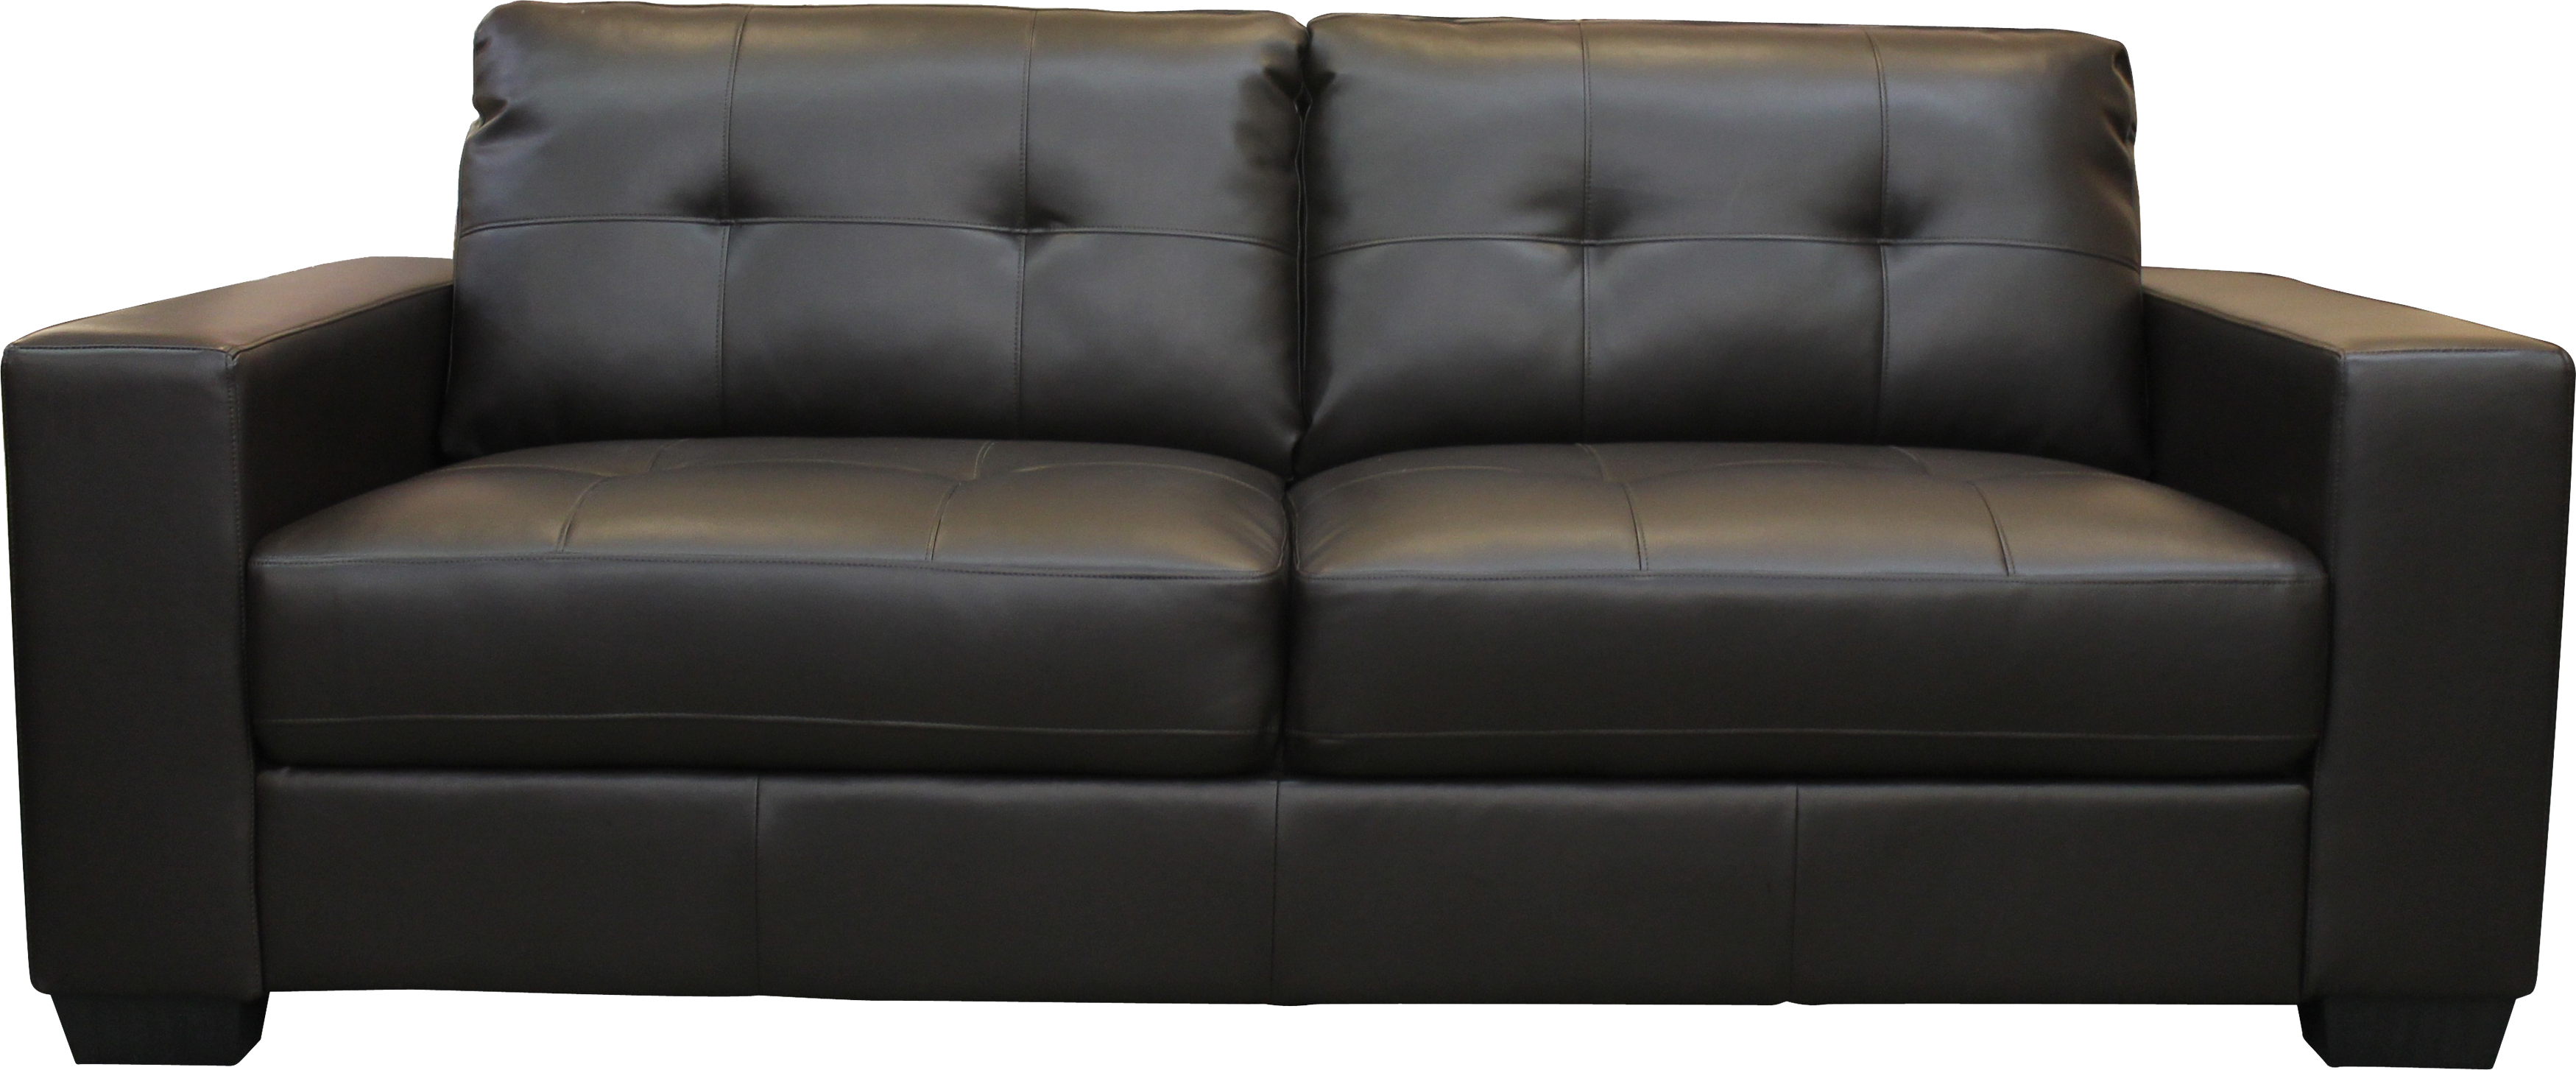 Black Couch PNG HD Quality